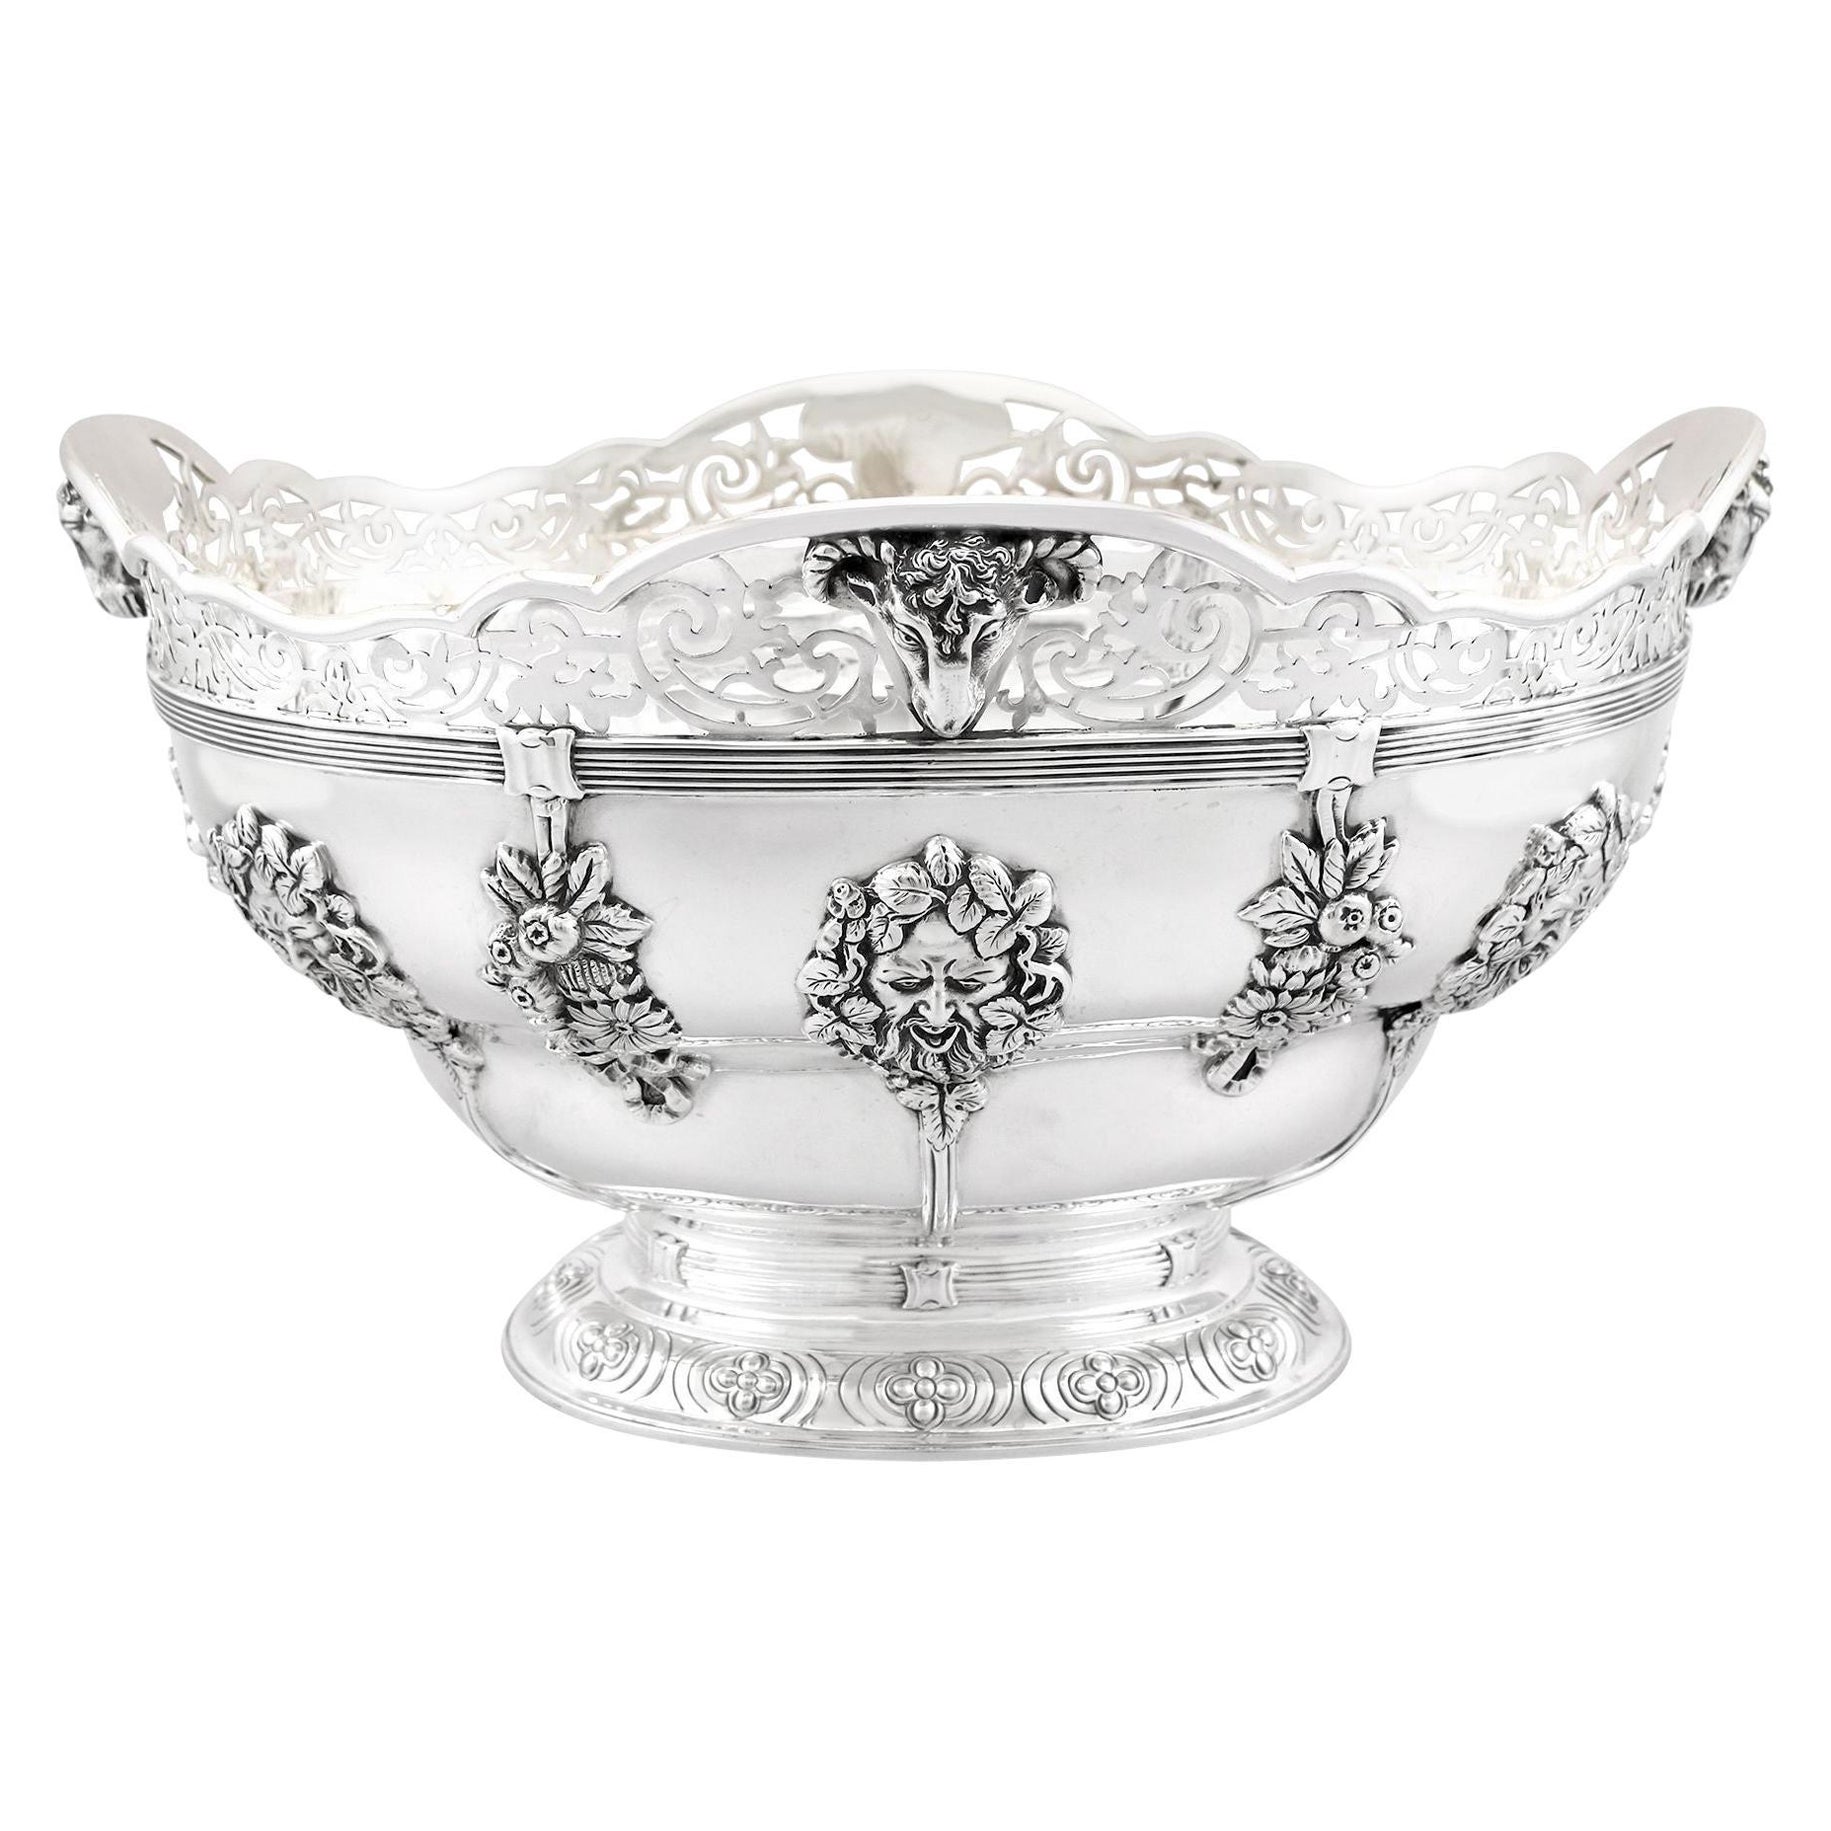 Wakely & Wheeler Antique Sterling Silver Presentation Bowl For Sale